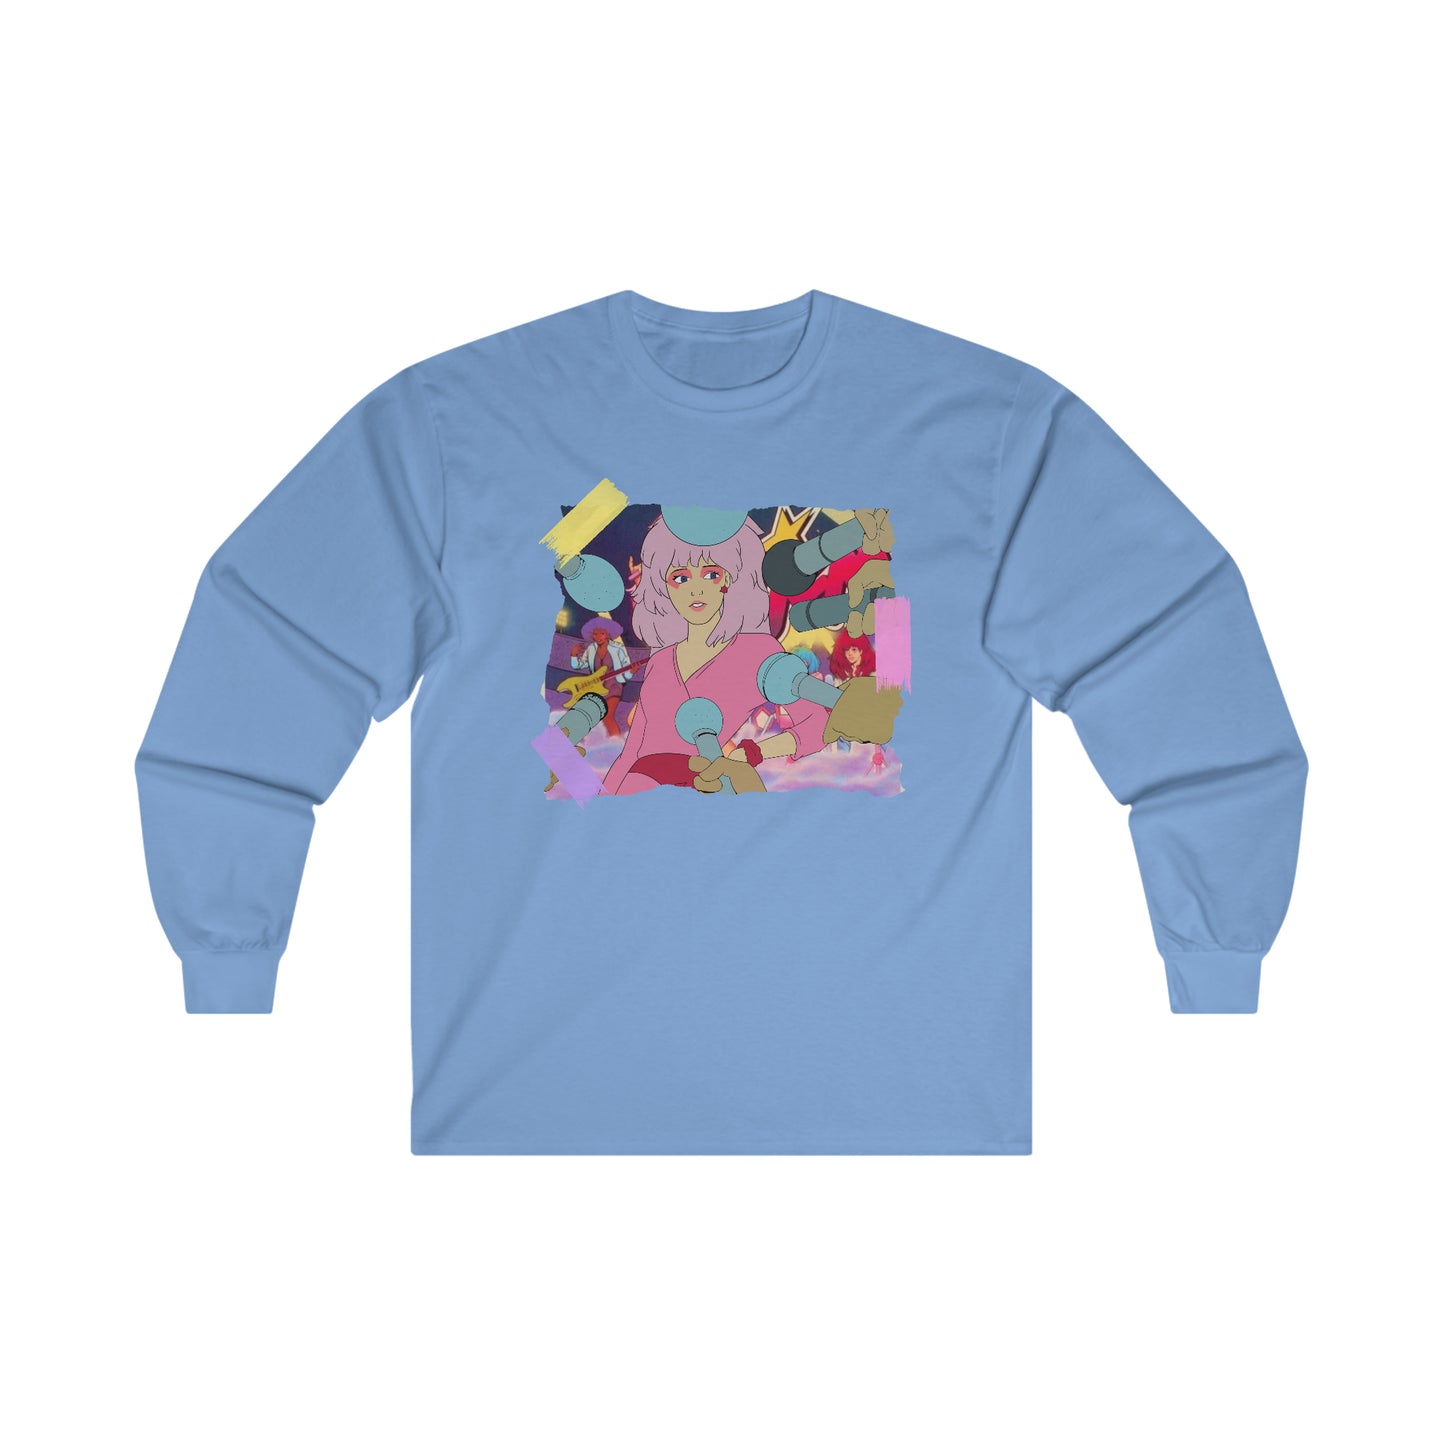 Outrageous Long Sleeve Tee